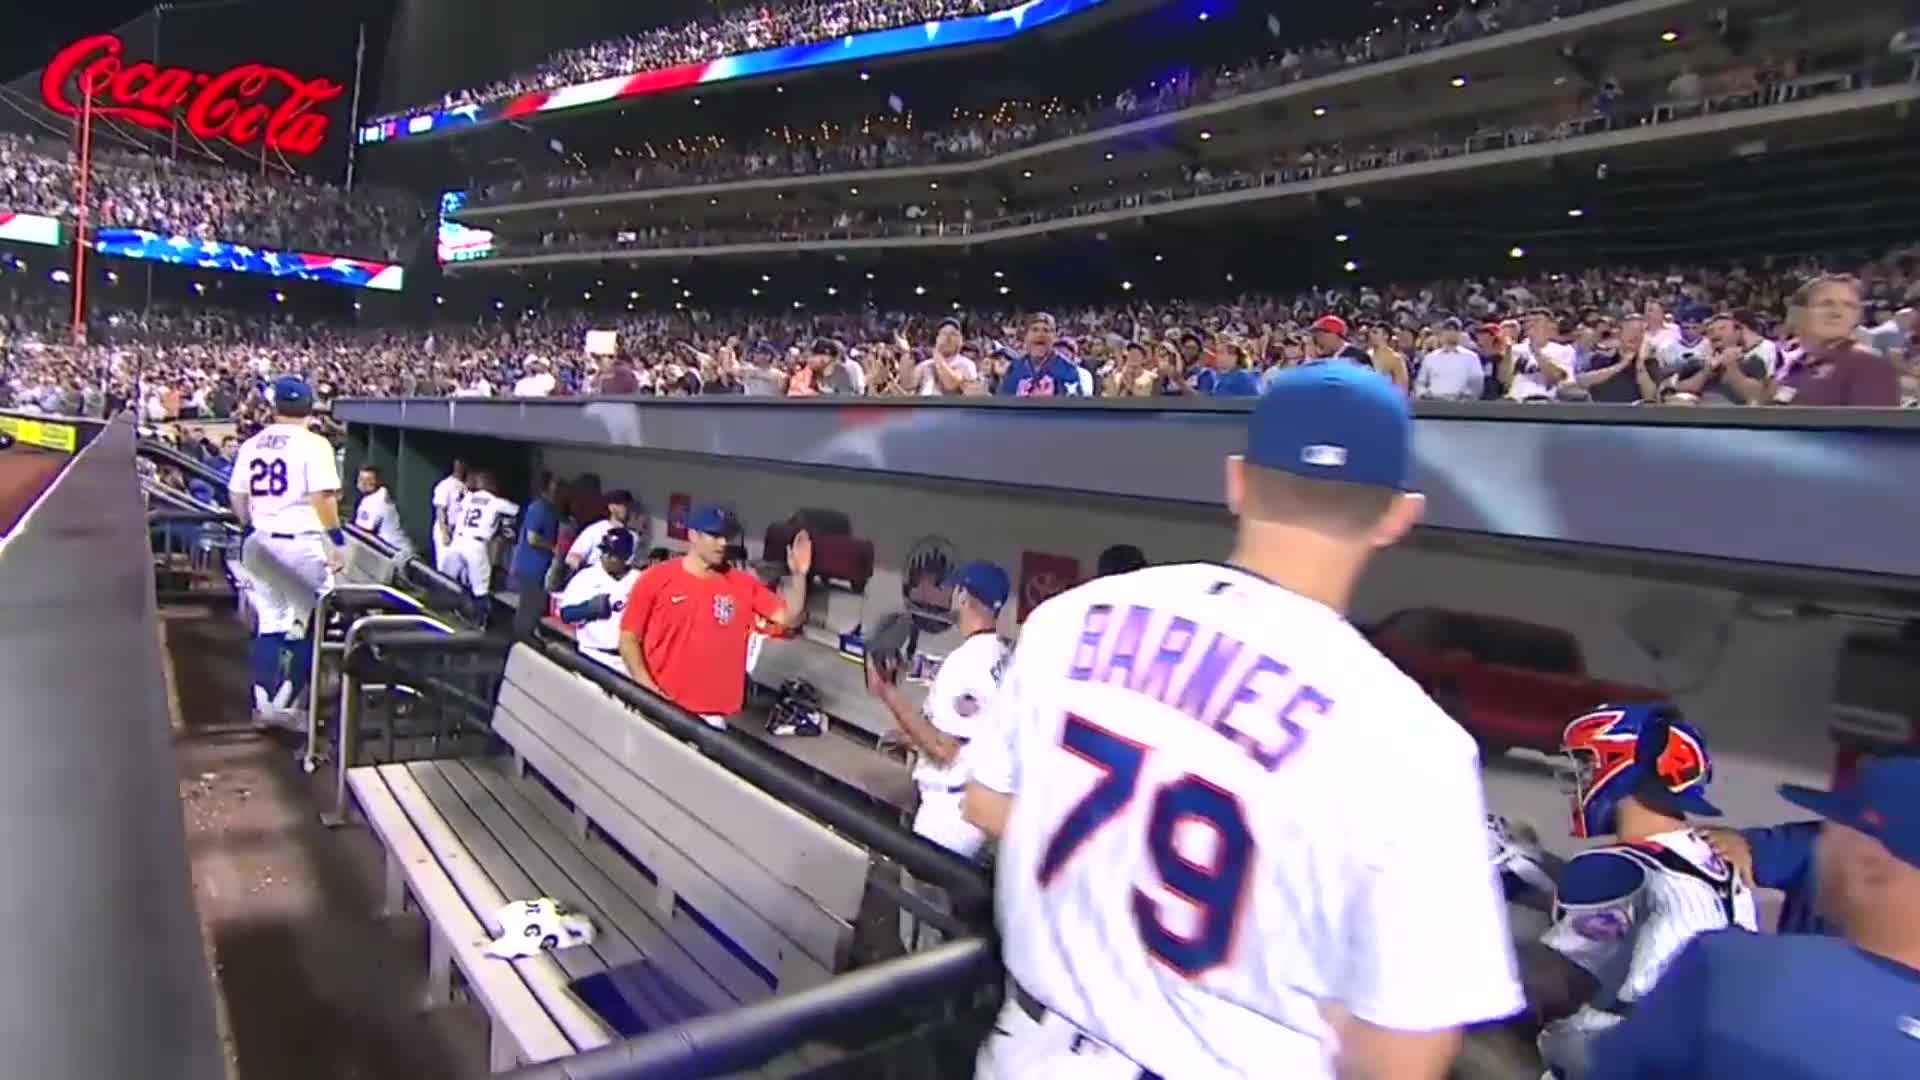 Max Scherzer fired up in the dugout after striking out Aaron Judge